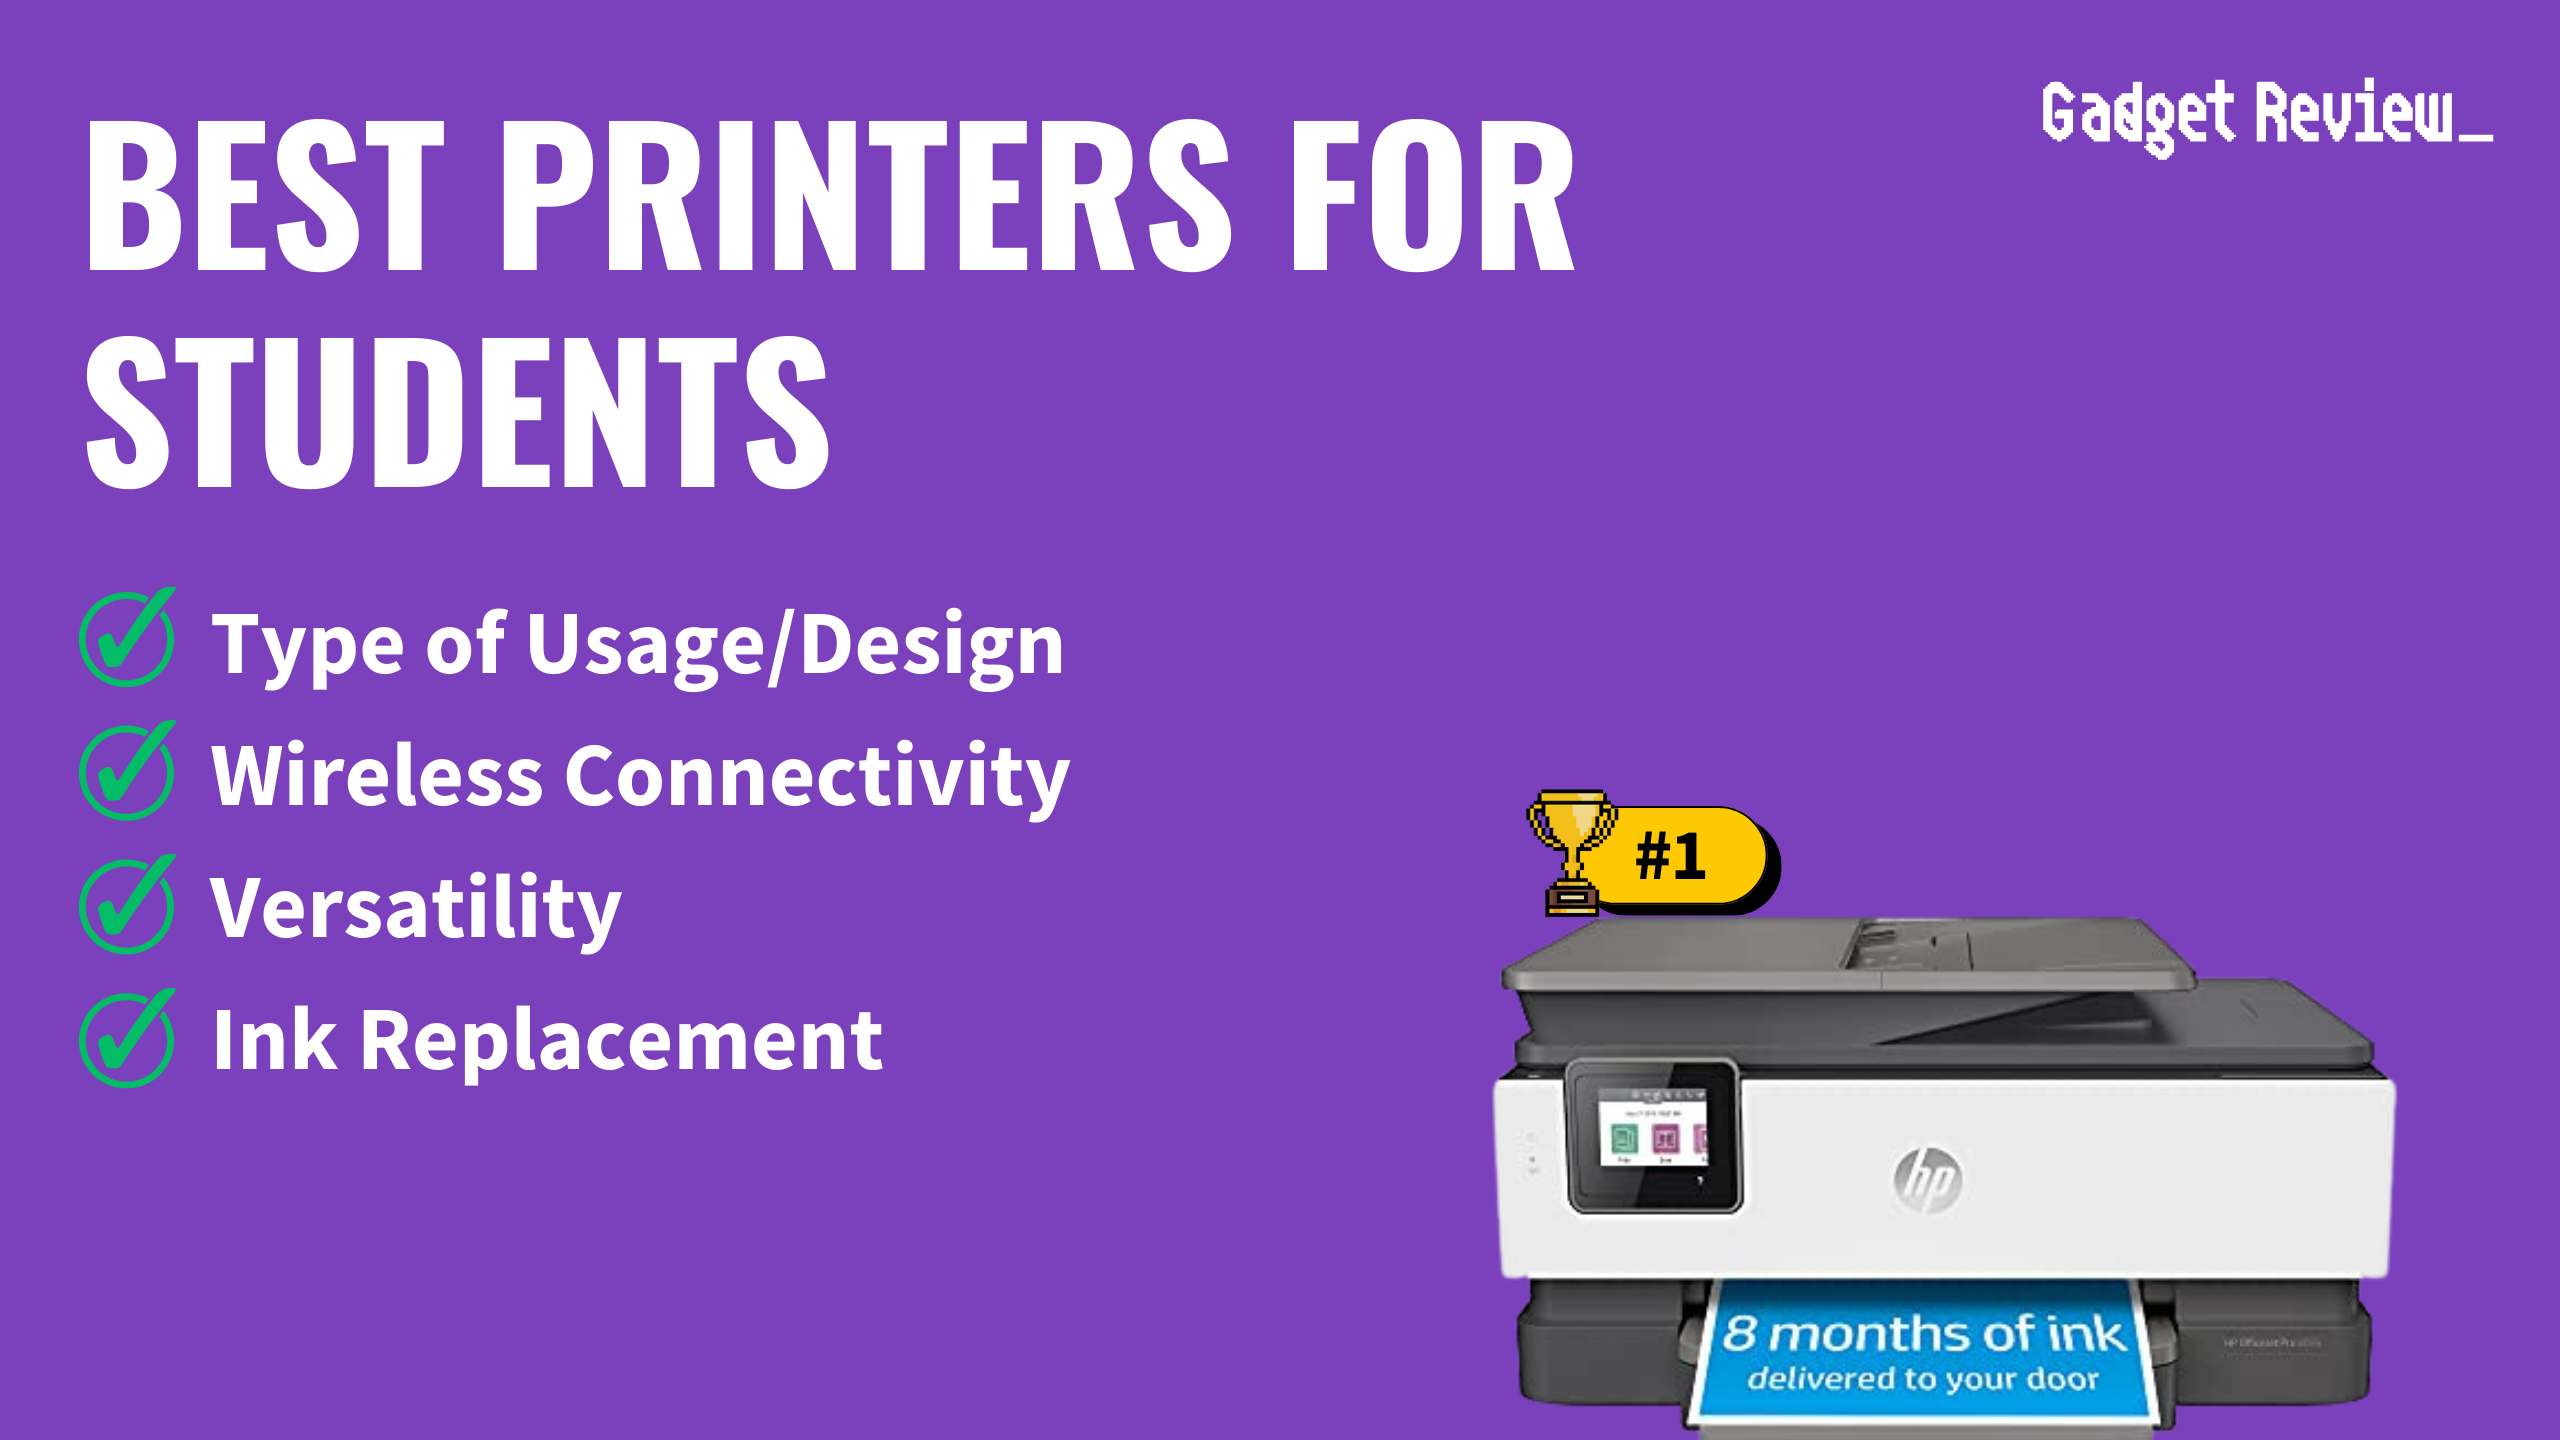 best printer students featured image that shows the top three best printer models